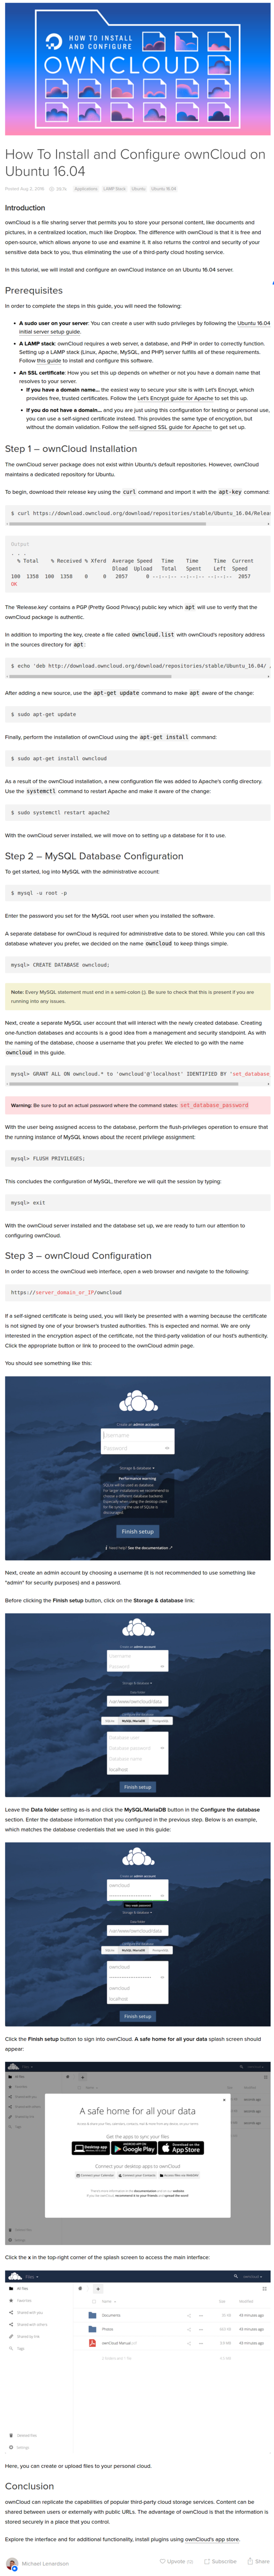 ./20161029-1155-cet-how-to-install-and-configure-owncloud-on-ubuntu-1604-1.png